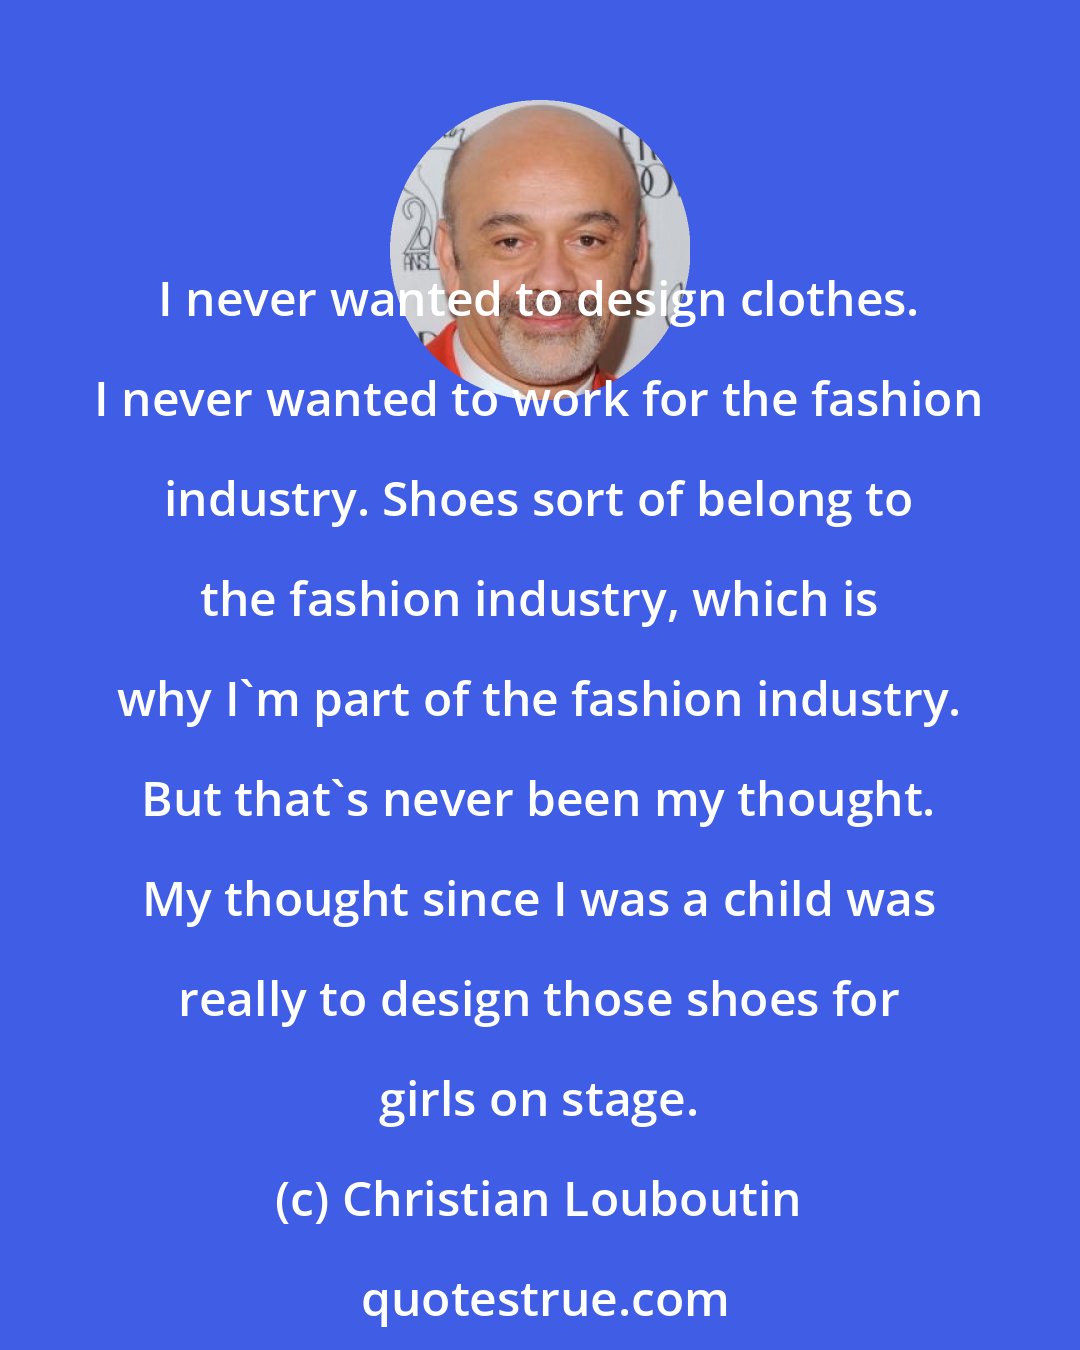 Christian Louboutin: I never wanted to design clothes. I never wanted to work for the fashion industry. Shoes sort of belong to the fashion industry, which is why I'm part of the fashion industry. But that's never been my thought. My thought since I was a child was really to design those shoes for girls on stage.